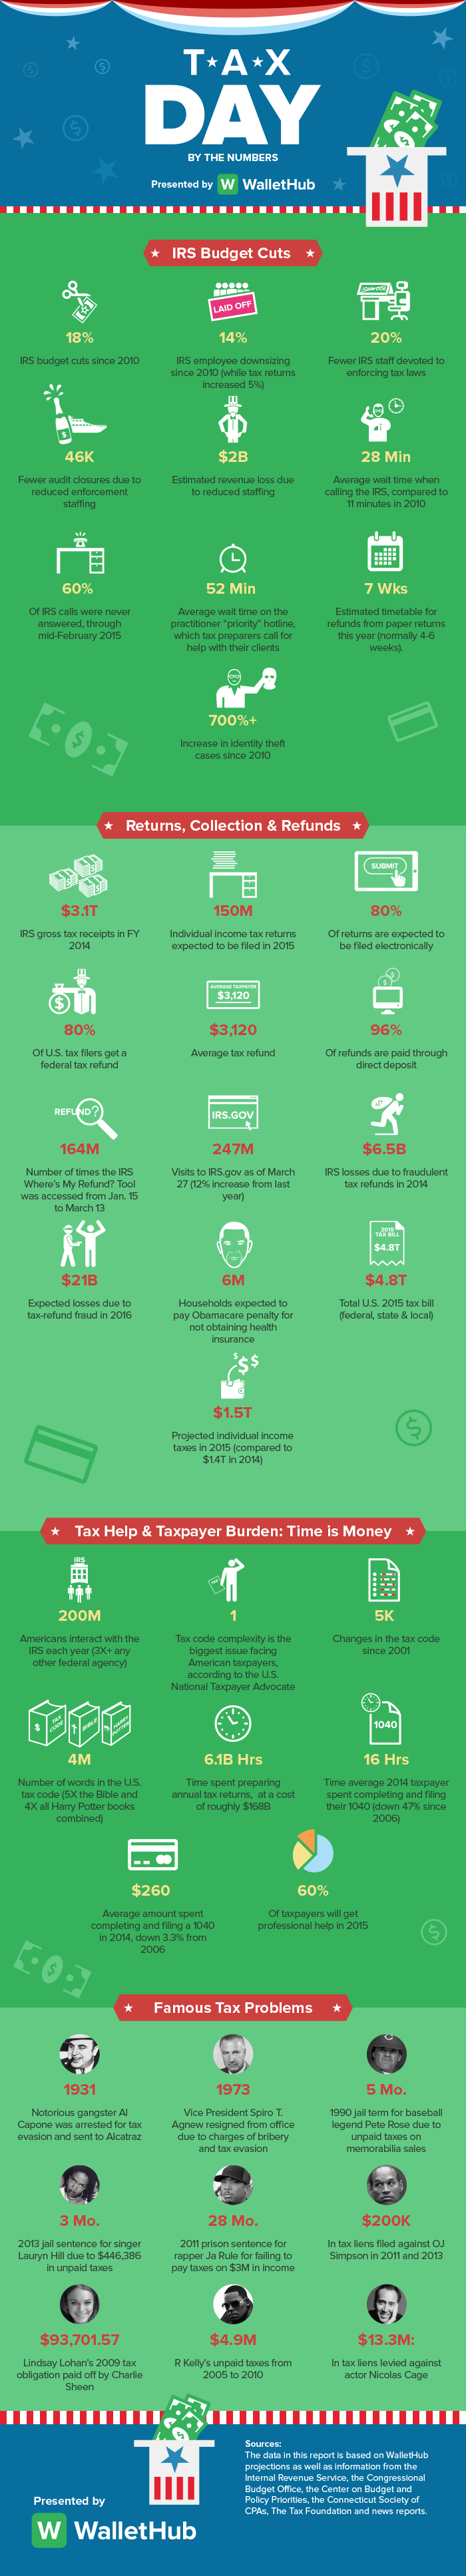 tax-day-by-the-numbers-infographic